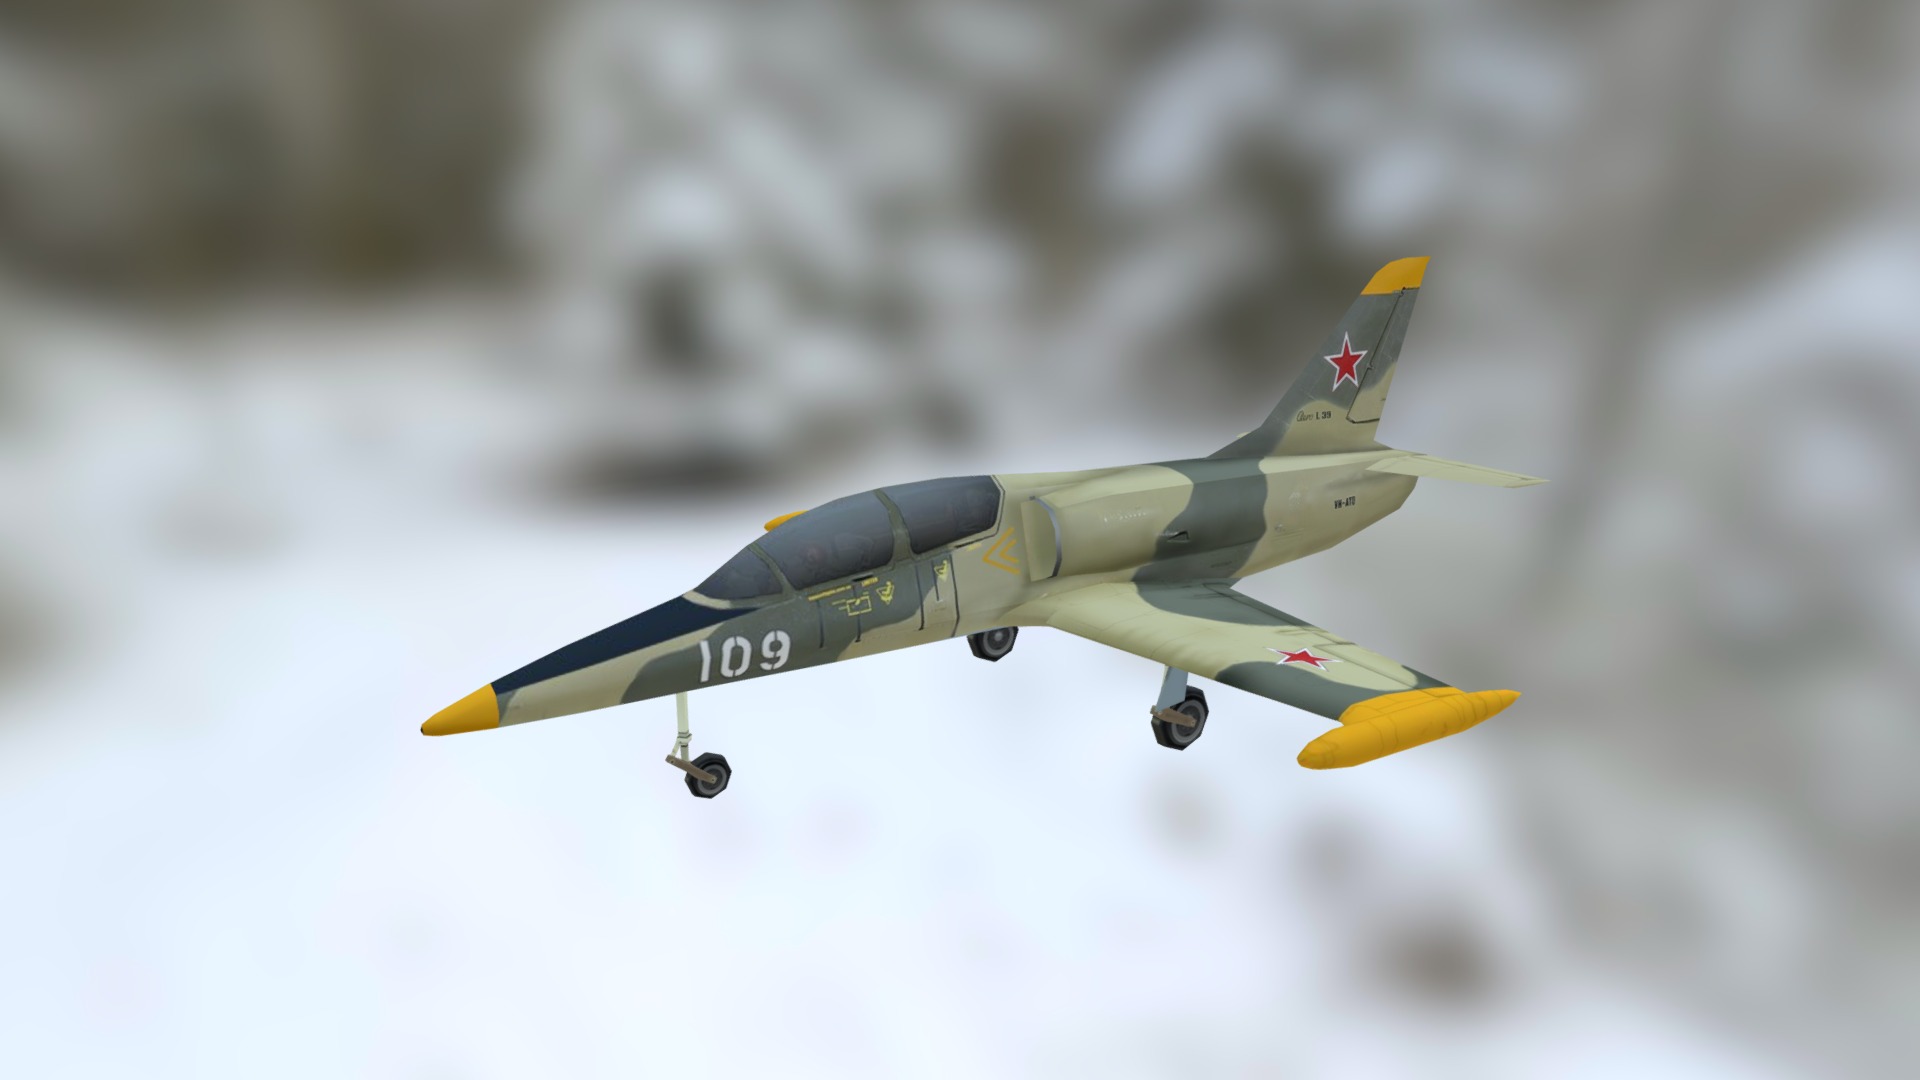 3D model Aerovodochody L39 Albatros - This is a 3D model of the Aerovodochody L39 Albatros. The 3D model is about a small airplane flying in the sky.